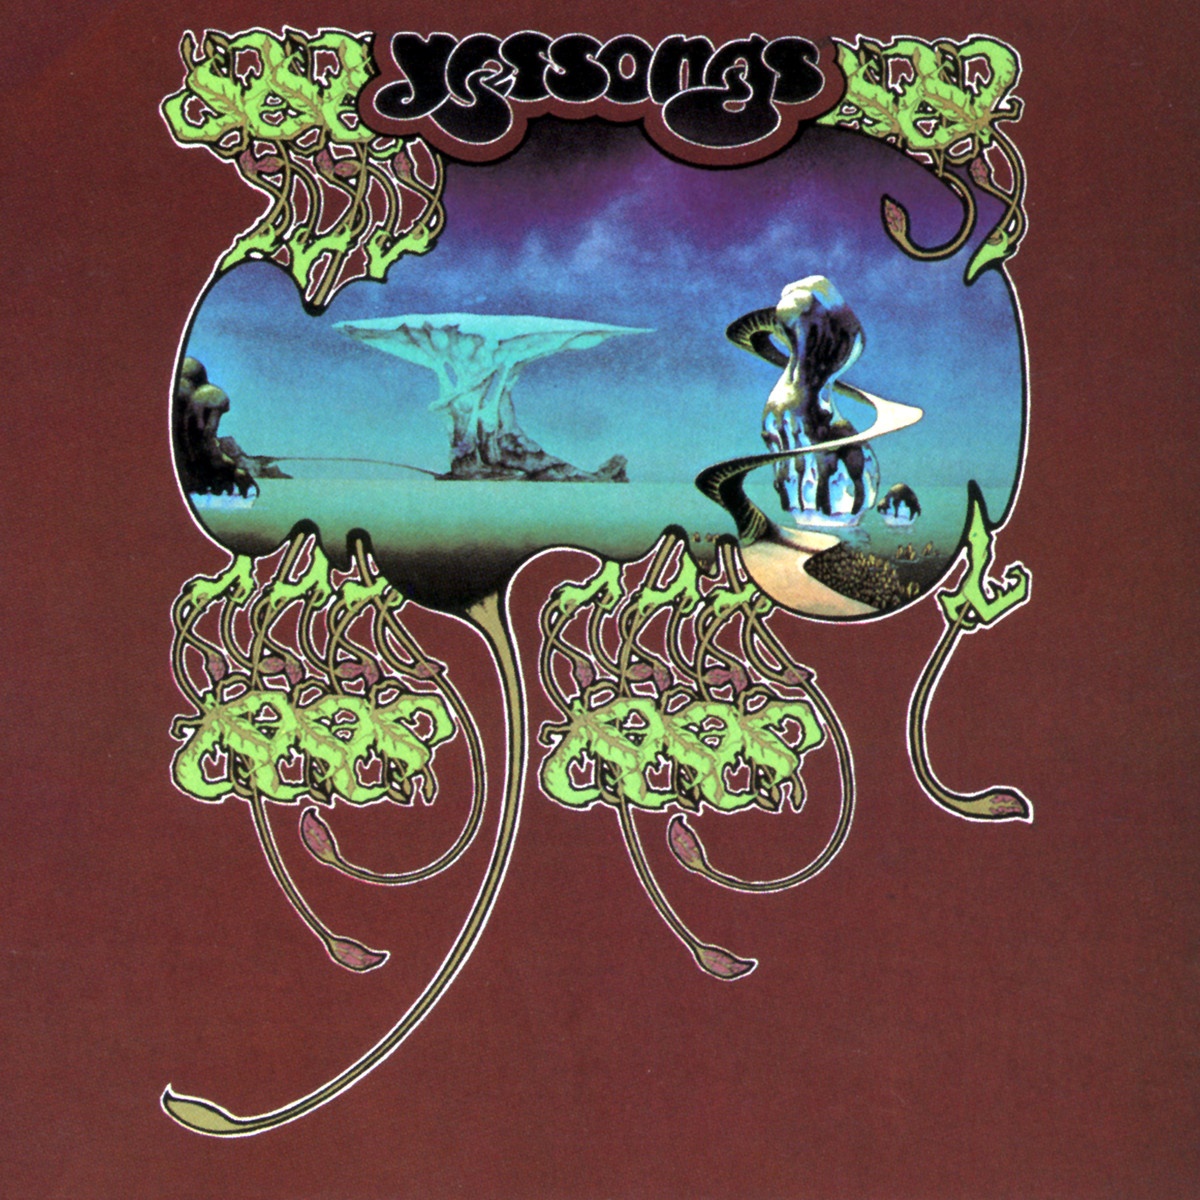 I've Seen All Good People (A. Your Move; B. All Good People) (Live LP from Yessongs)